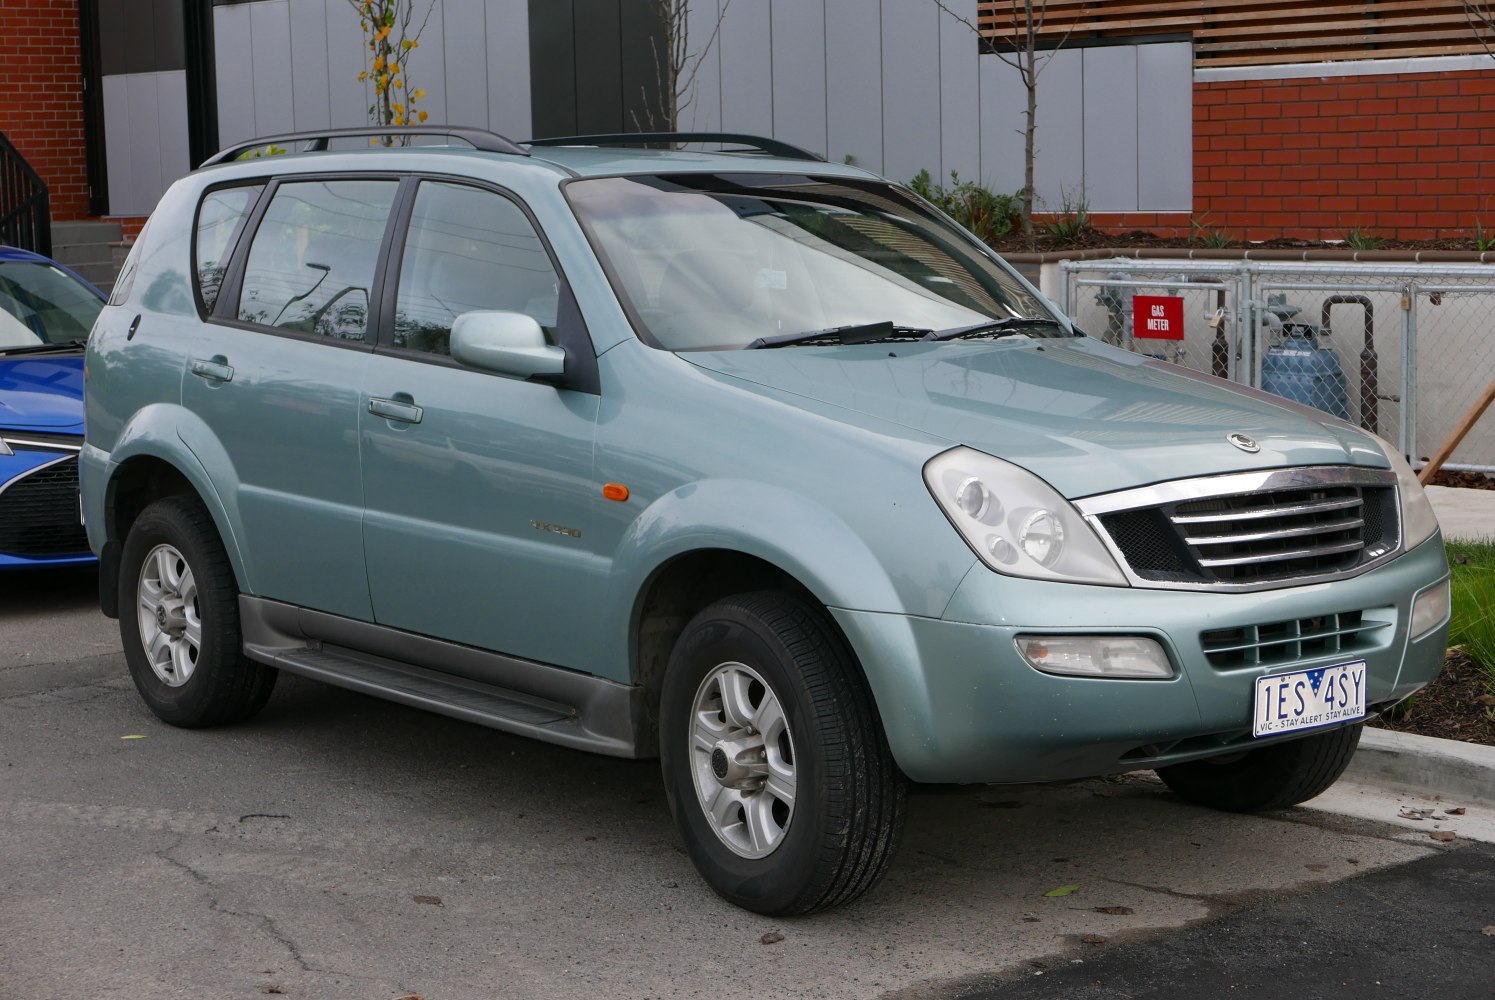 https://totalrenting.es/wp-content/uploads/2022/10/ssangyong-rexton-i-2001-rx-230-143-cv-suv.png